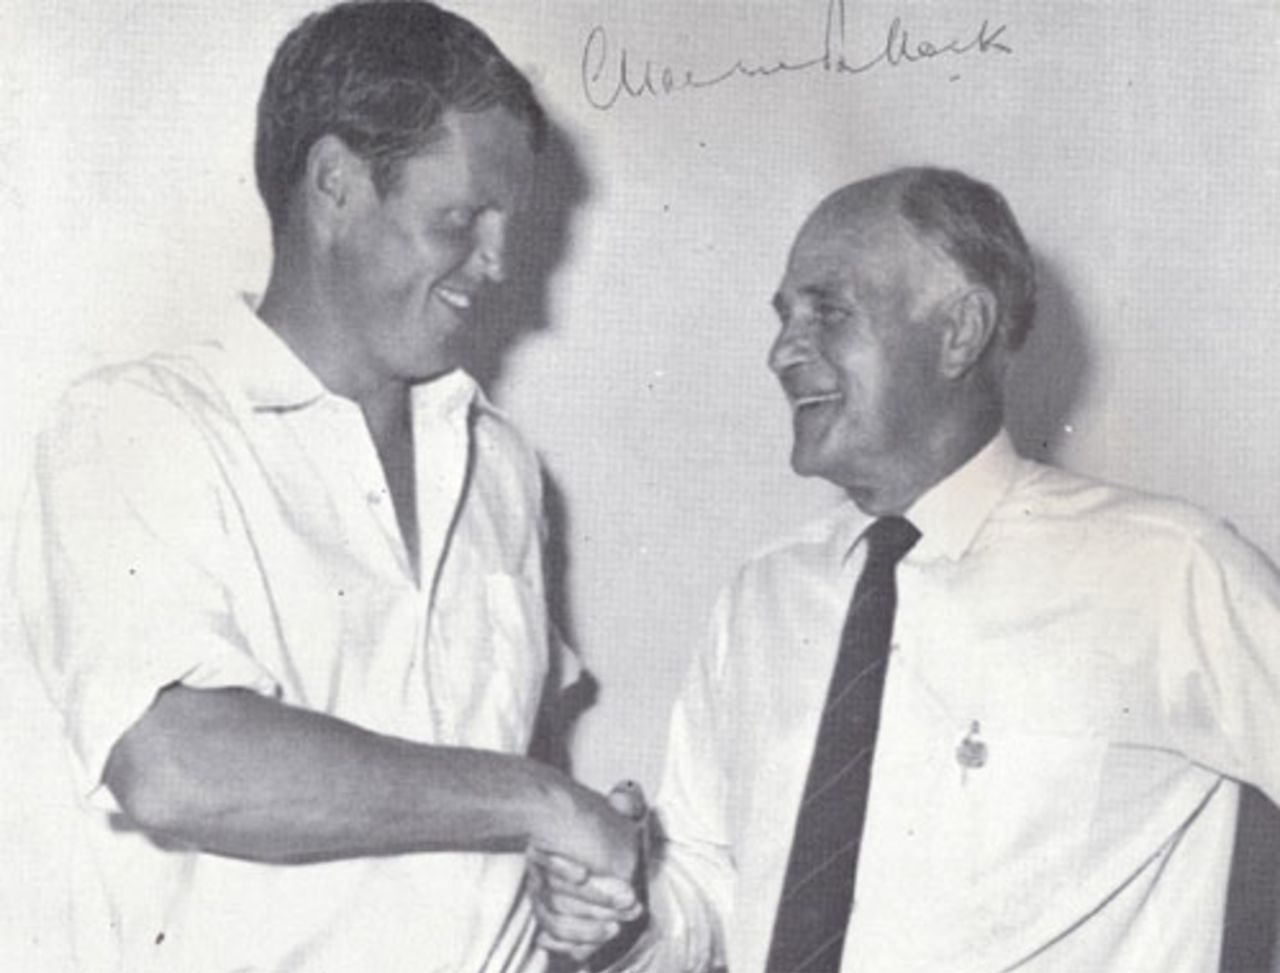 Graeme Pollock is congratulated by Dudley Nourse after his innings of 274, South Africa v Australia, 2nd Test, Durban, February 6, 1970